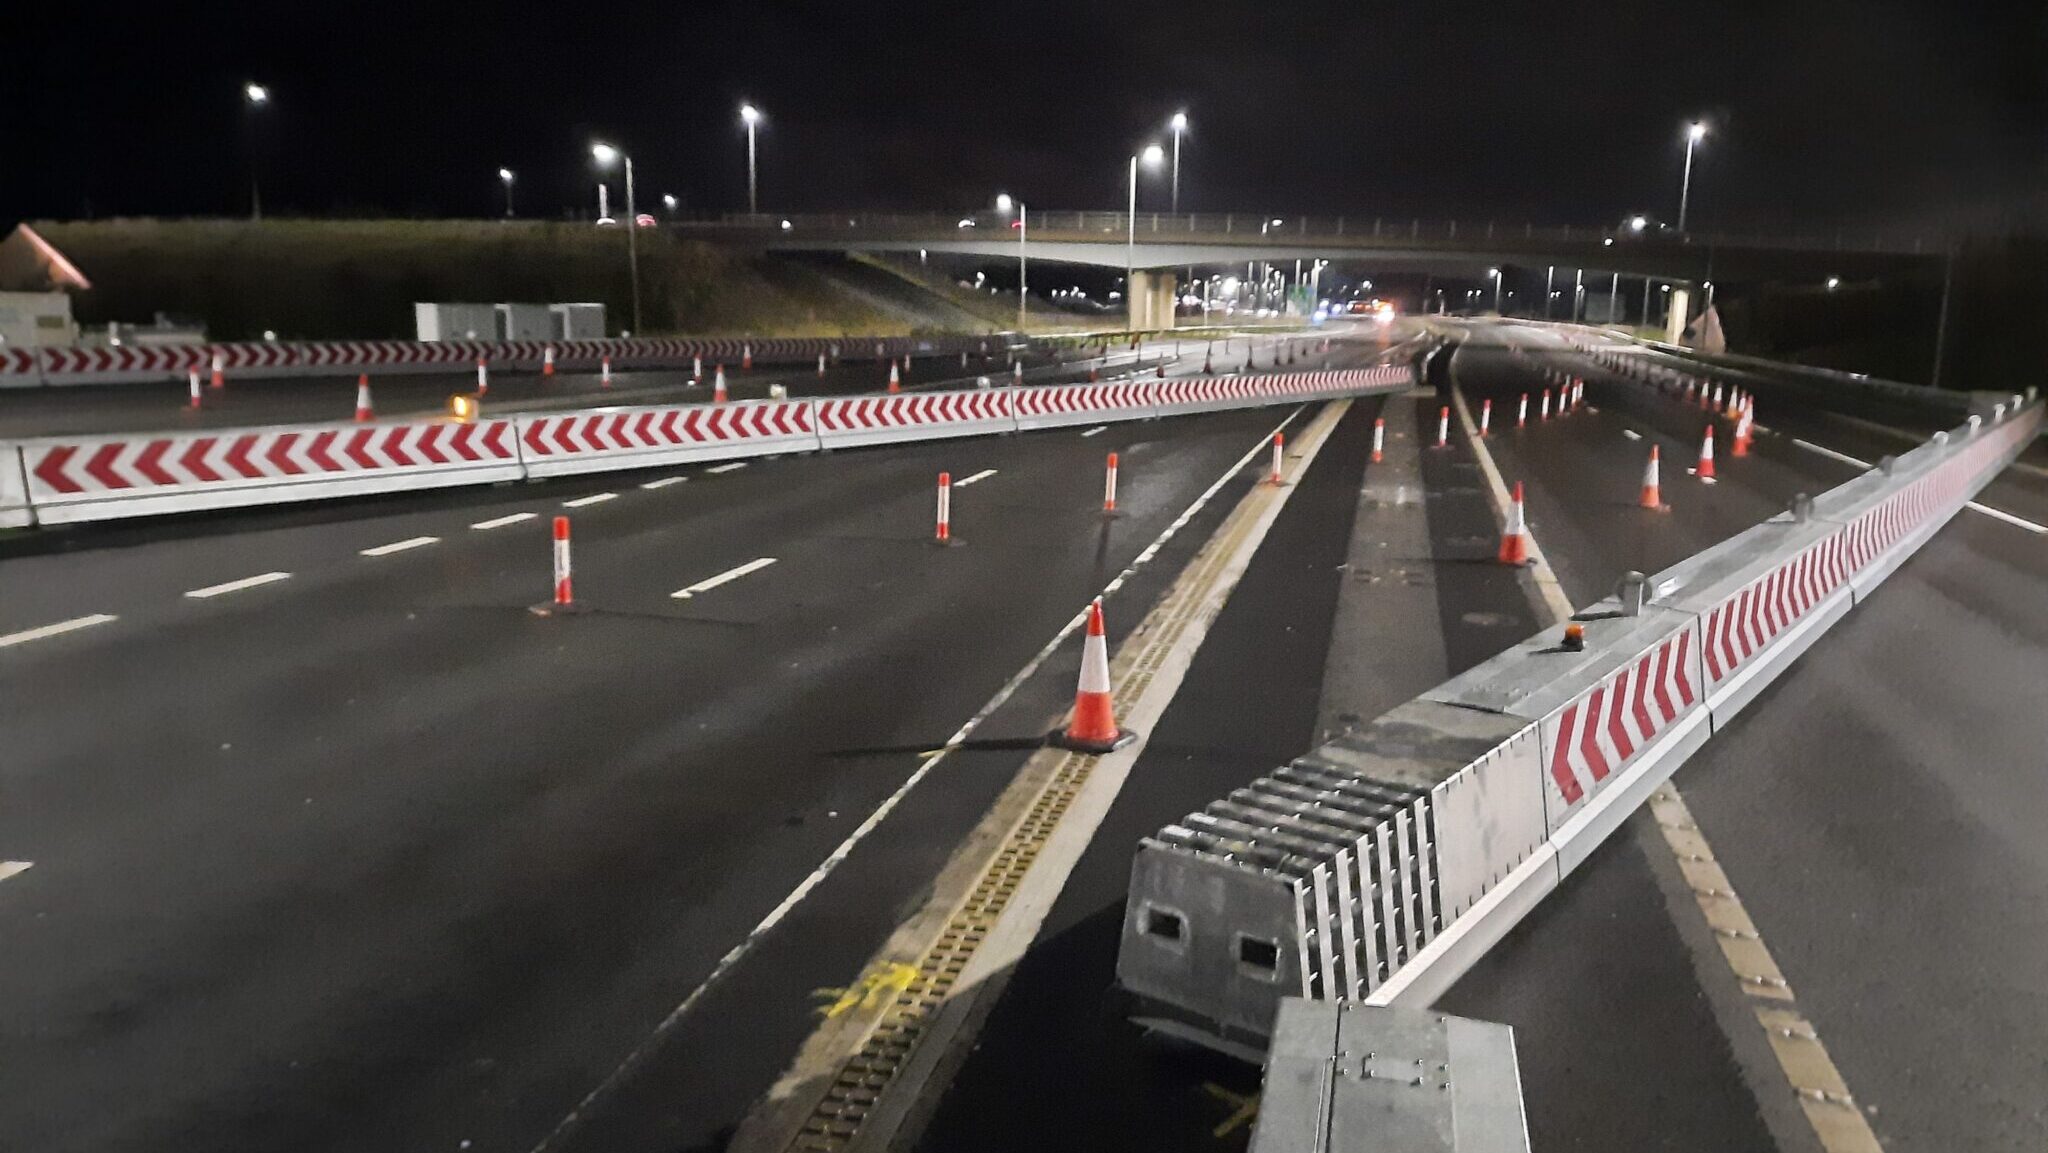 M90 WORKS – ‘INTELLIGENT ROAD STUDS’ FOR QUEENSFERRY CROSSING AUTOMATED BARRRIERS